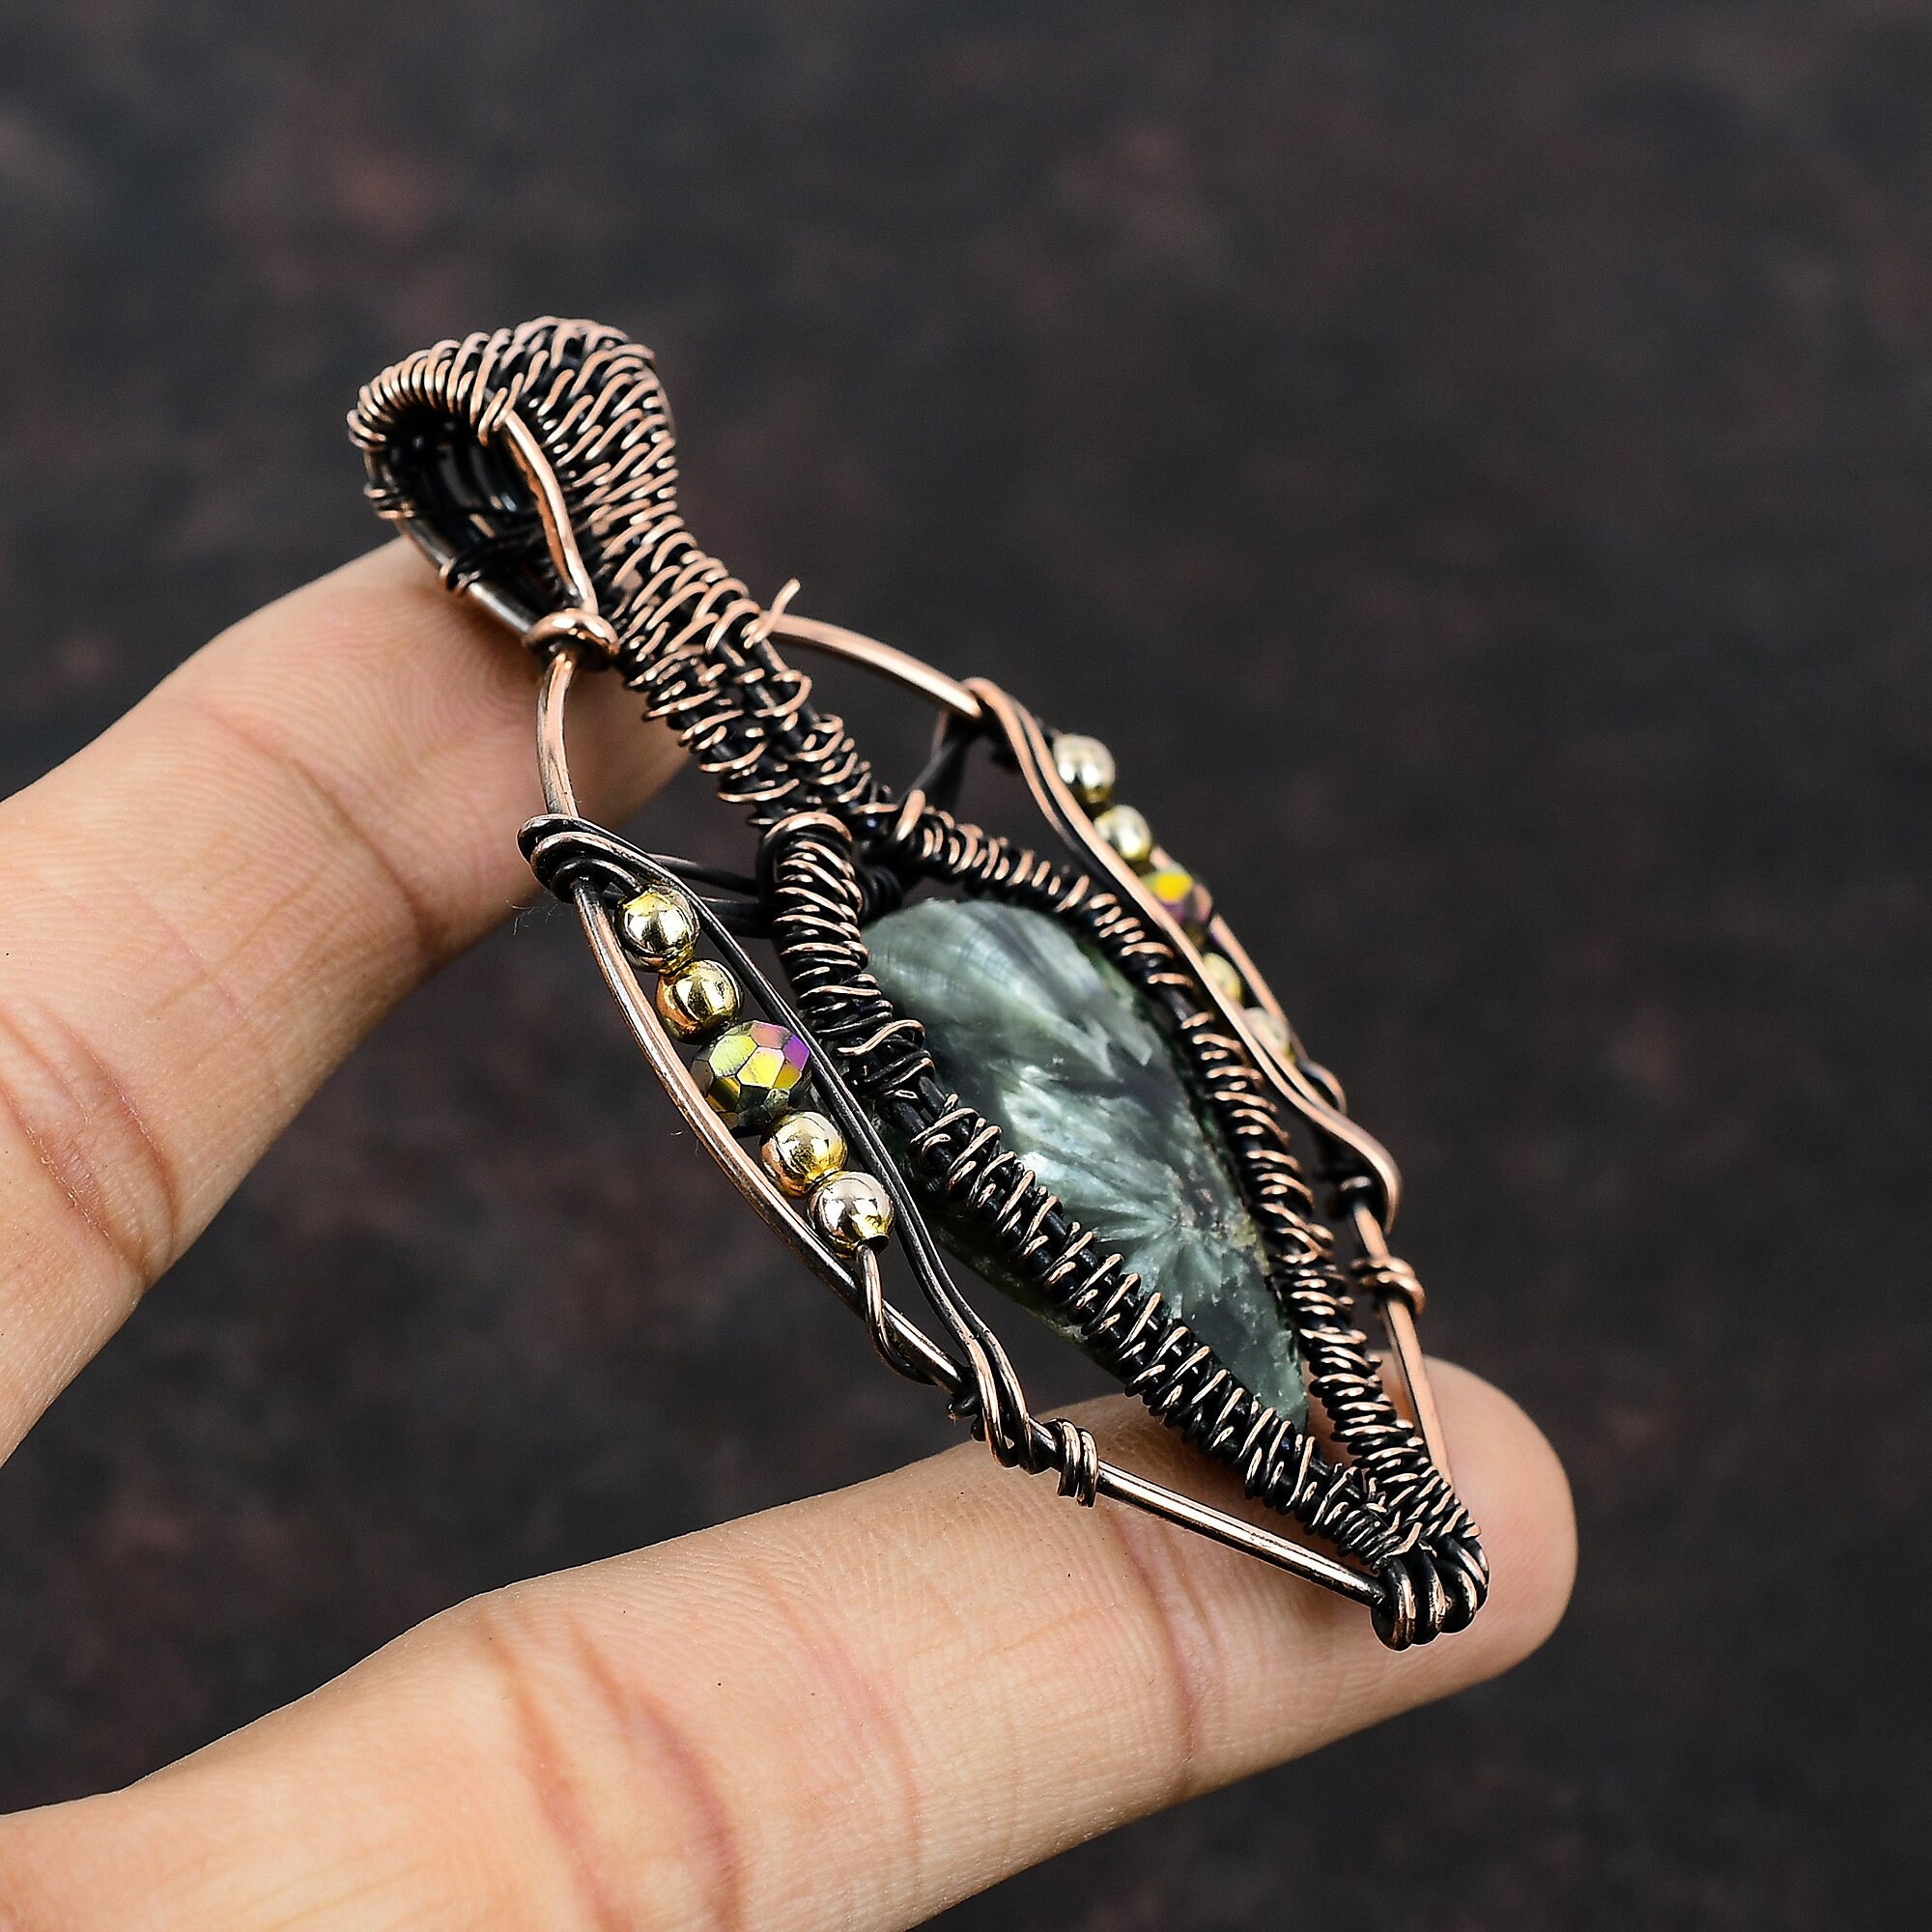 Wire Wrapped Copper Necklace with Seraphinite Bead. Sun Pendant with Seraphinite. | DmitriyBrovkoJewelry